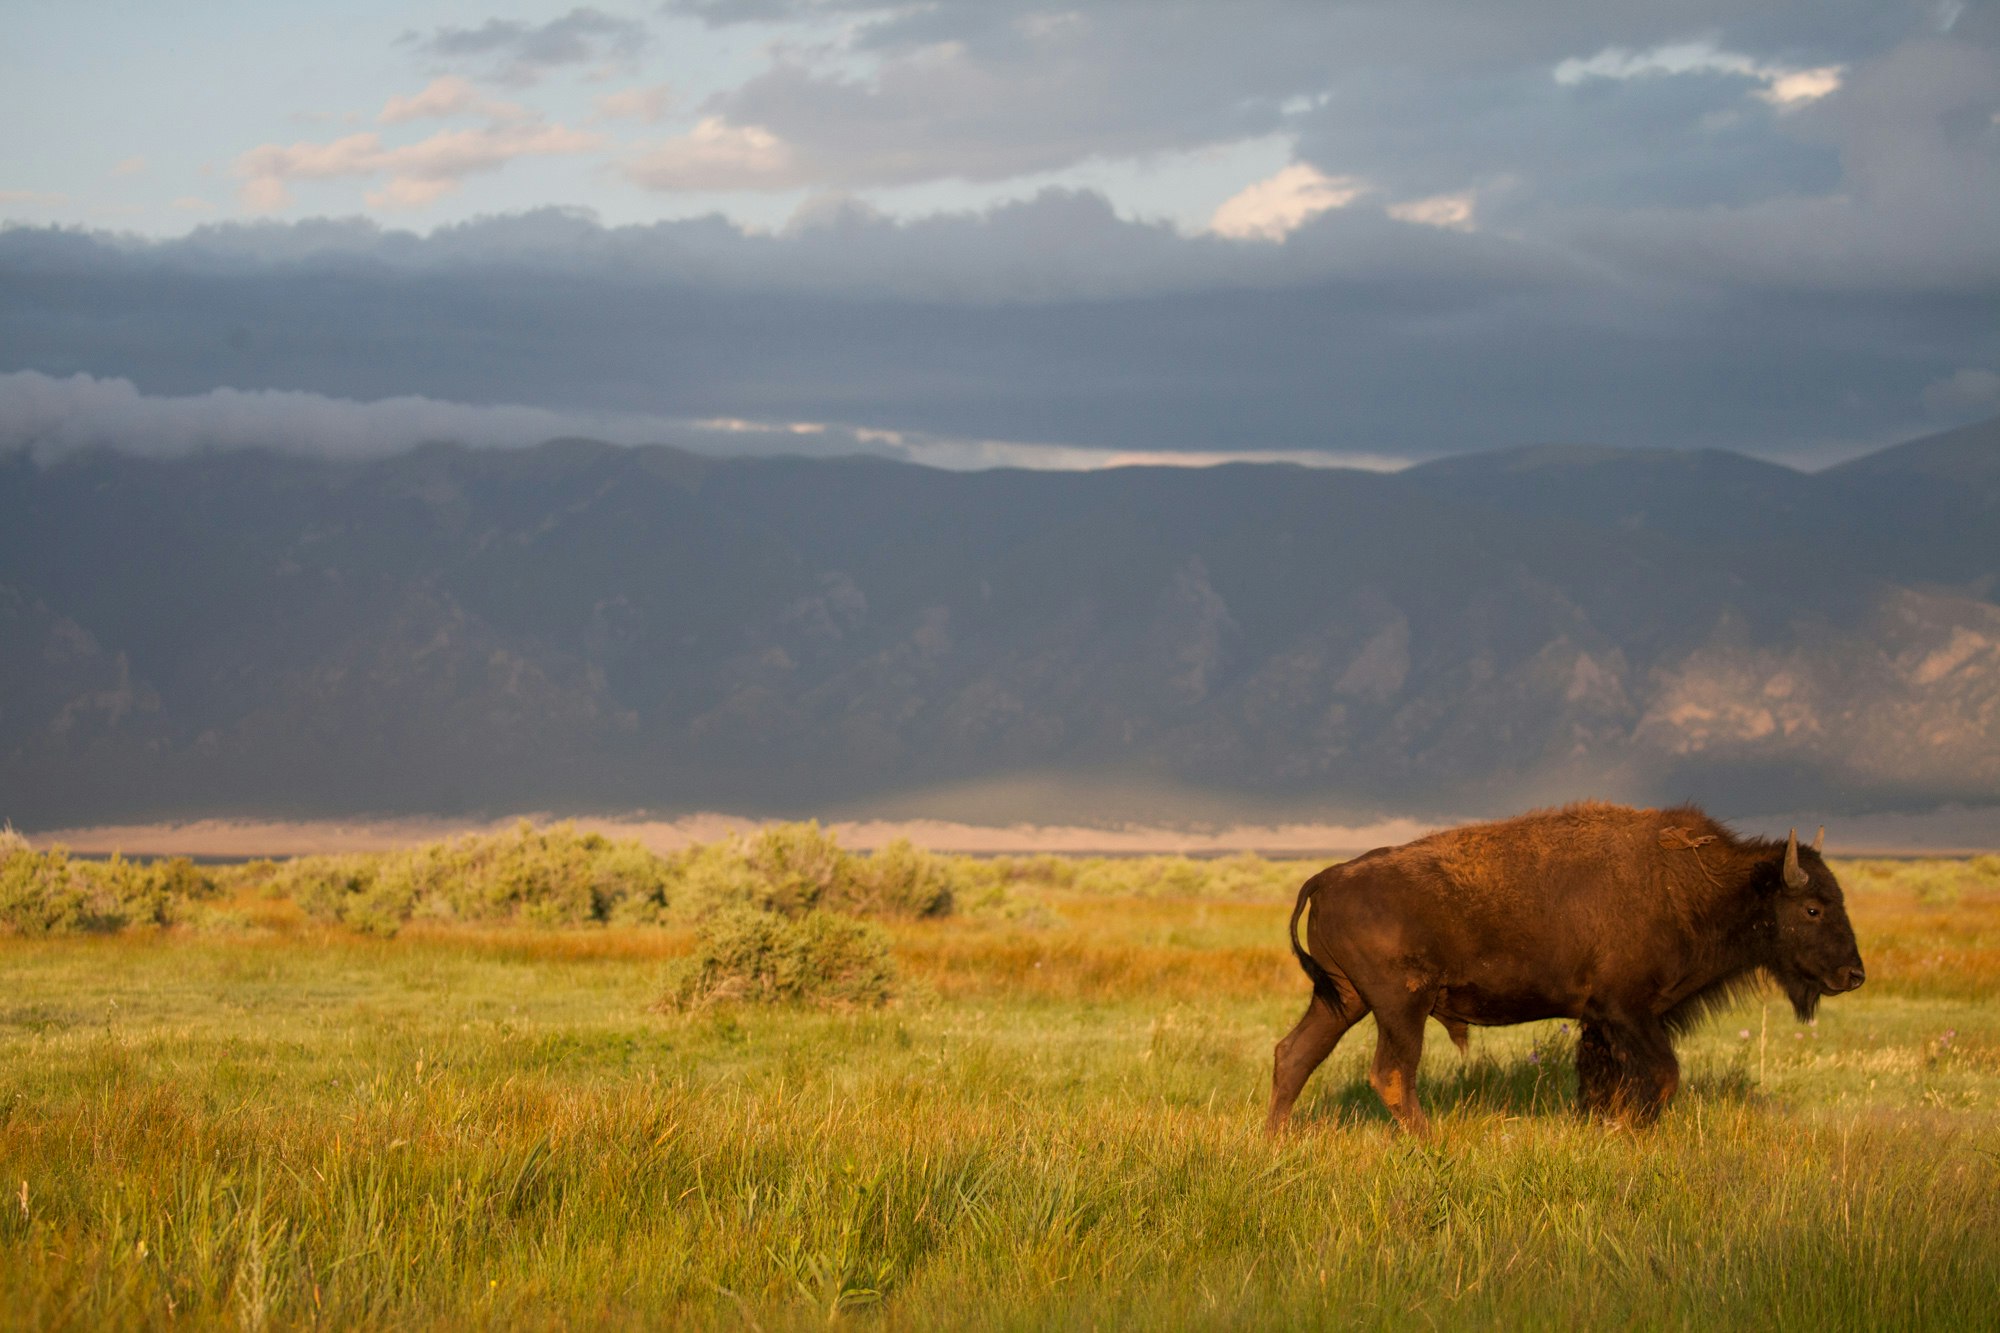 A bison grazes in front of a mountain range at sunset on the Zapata Ranch in Colorado